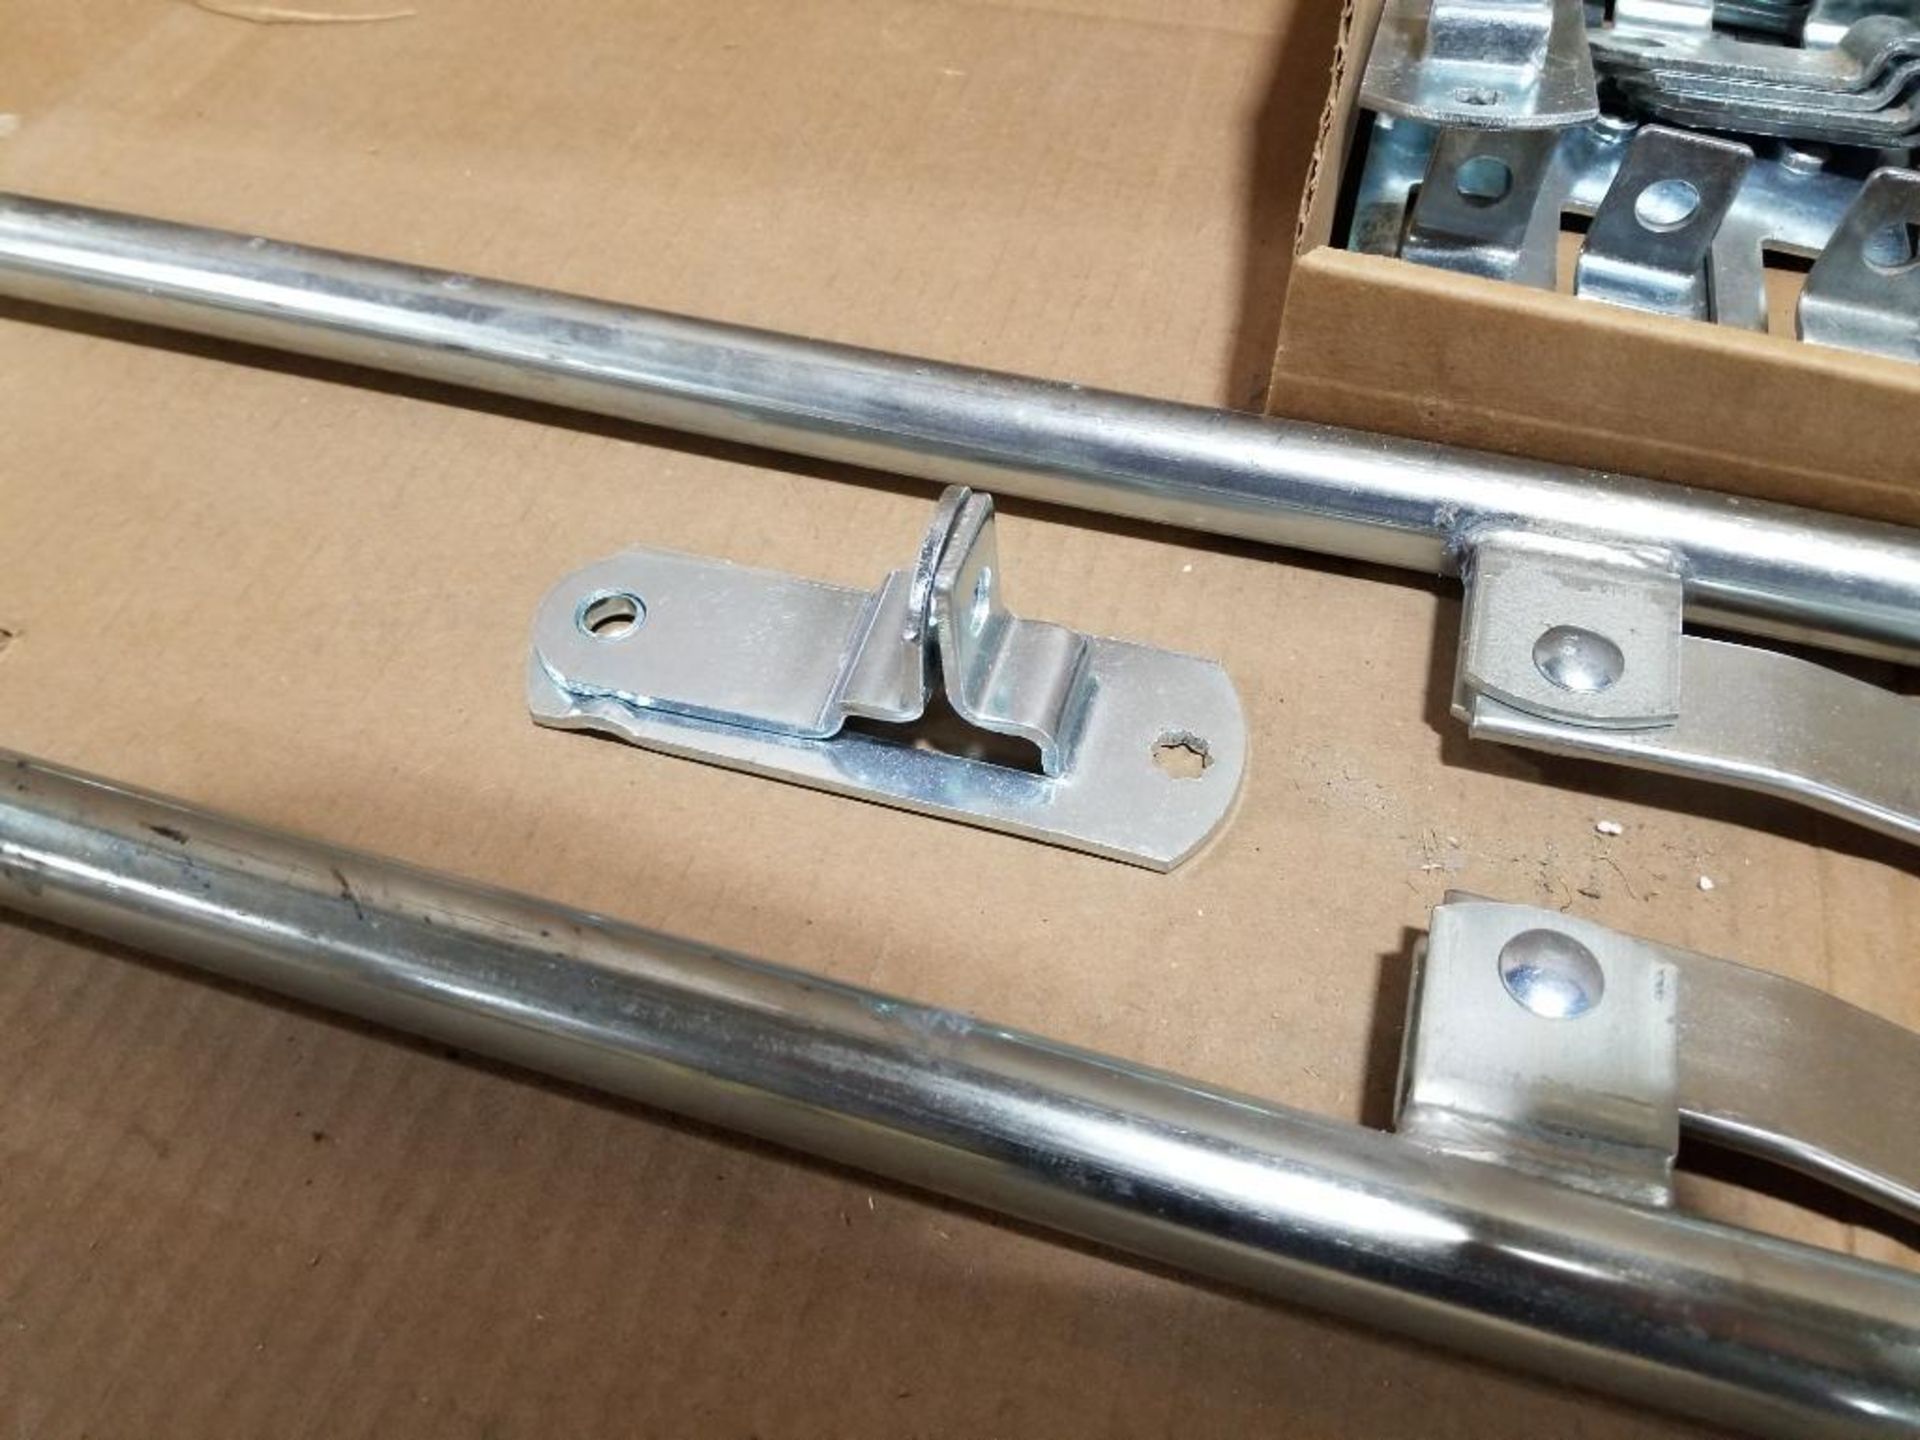 Qty 10 pairs - Door bar lock assembly with hardware. 72in overall length. - Image 4 of 7